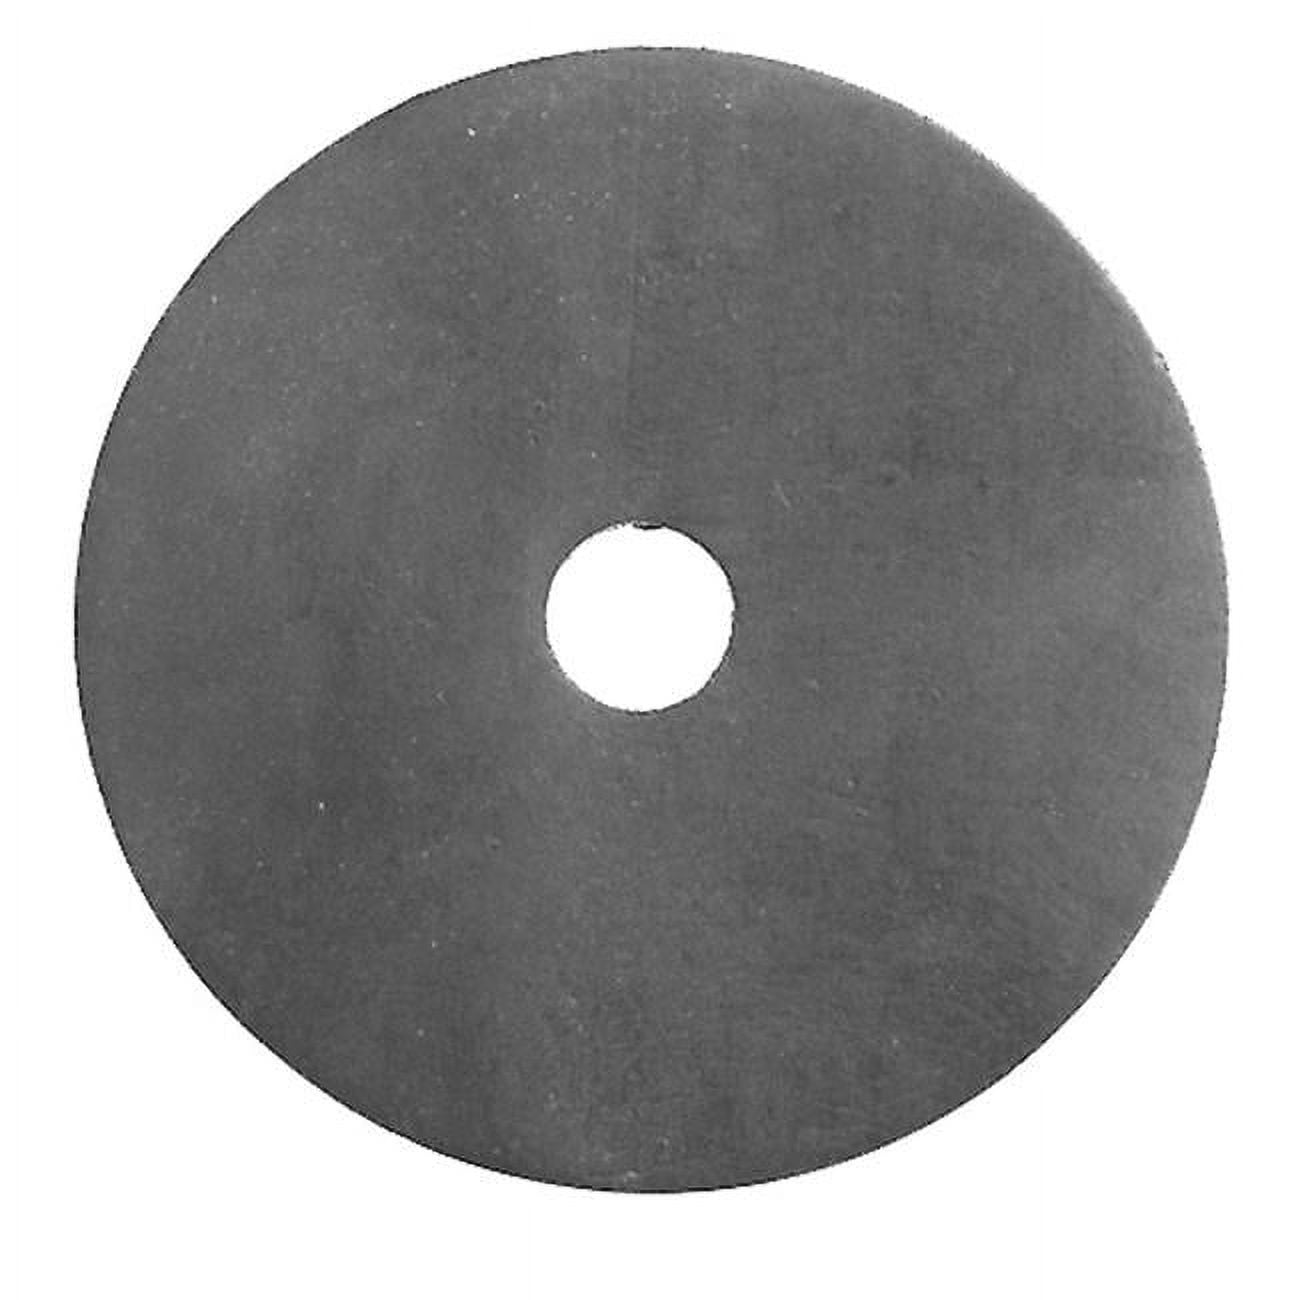 61809b 1.5 X 1.25 In. Rubber Flat Washer- Pack Of 5